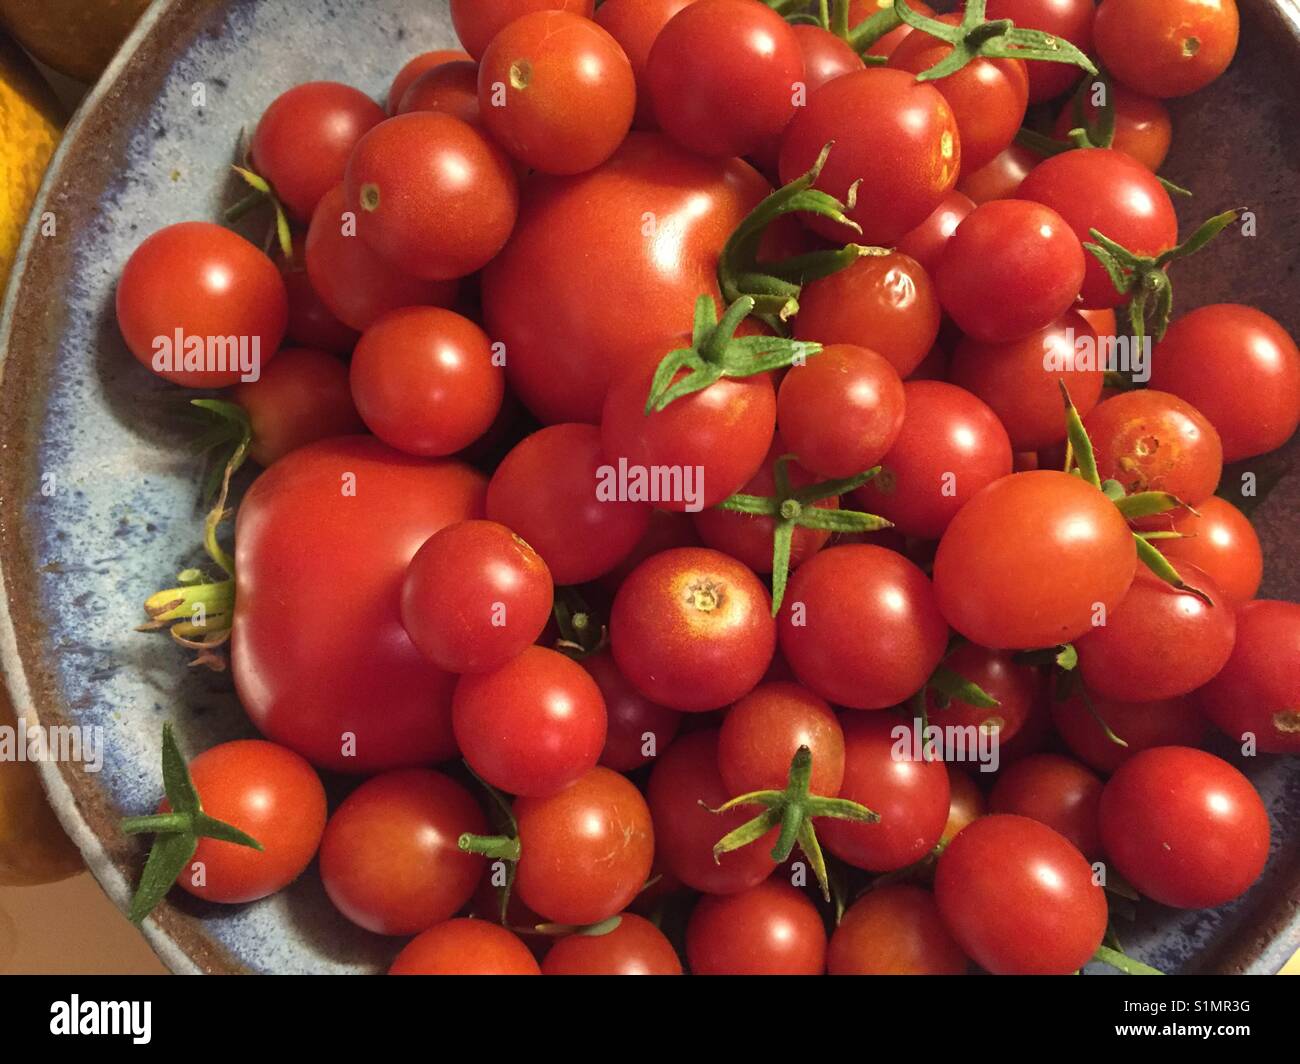 Untouched Photo of Tomatoes Stock Photo